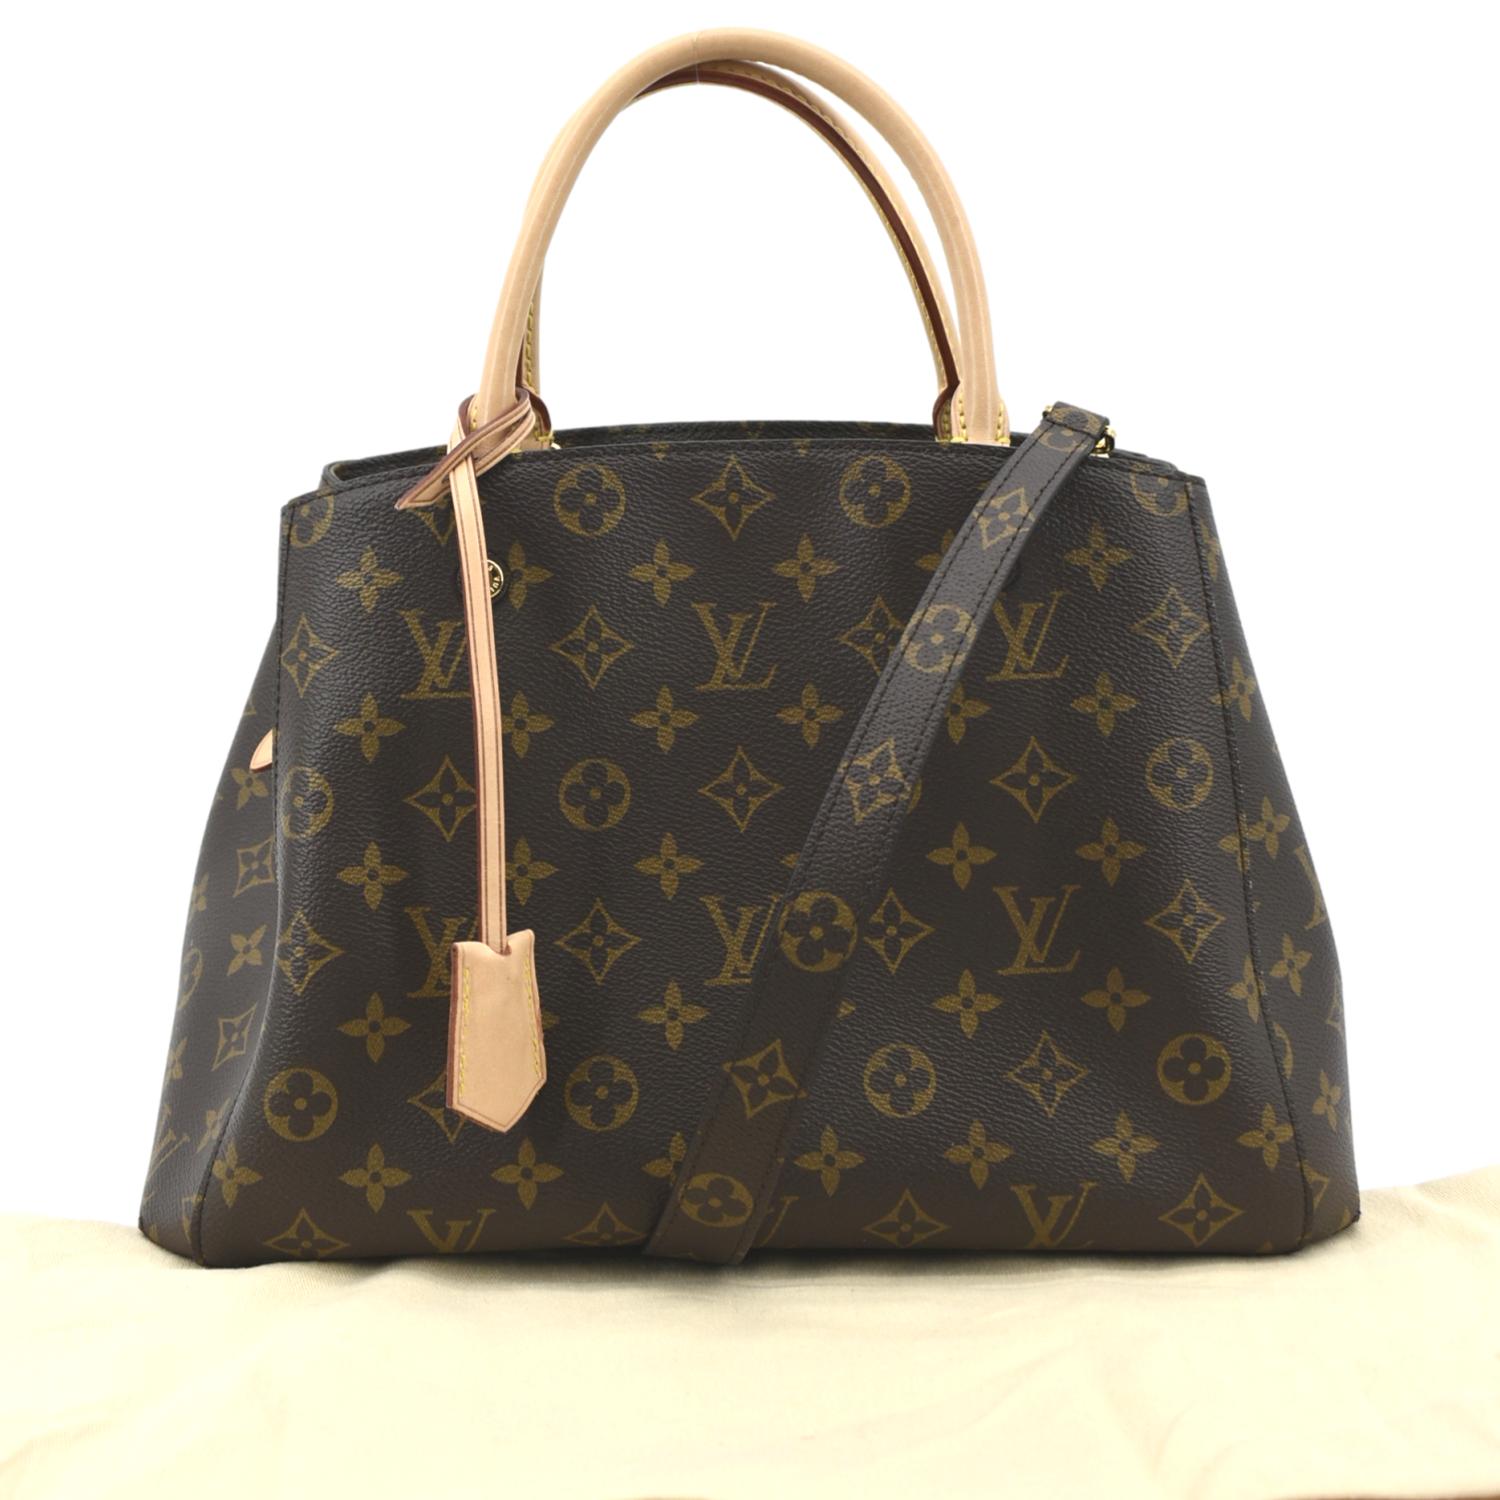 WHATS IN MY BAG? LOUIS VUITTON MONTAIGNE